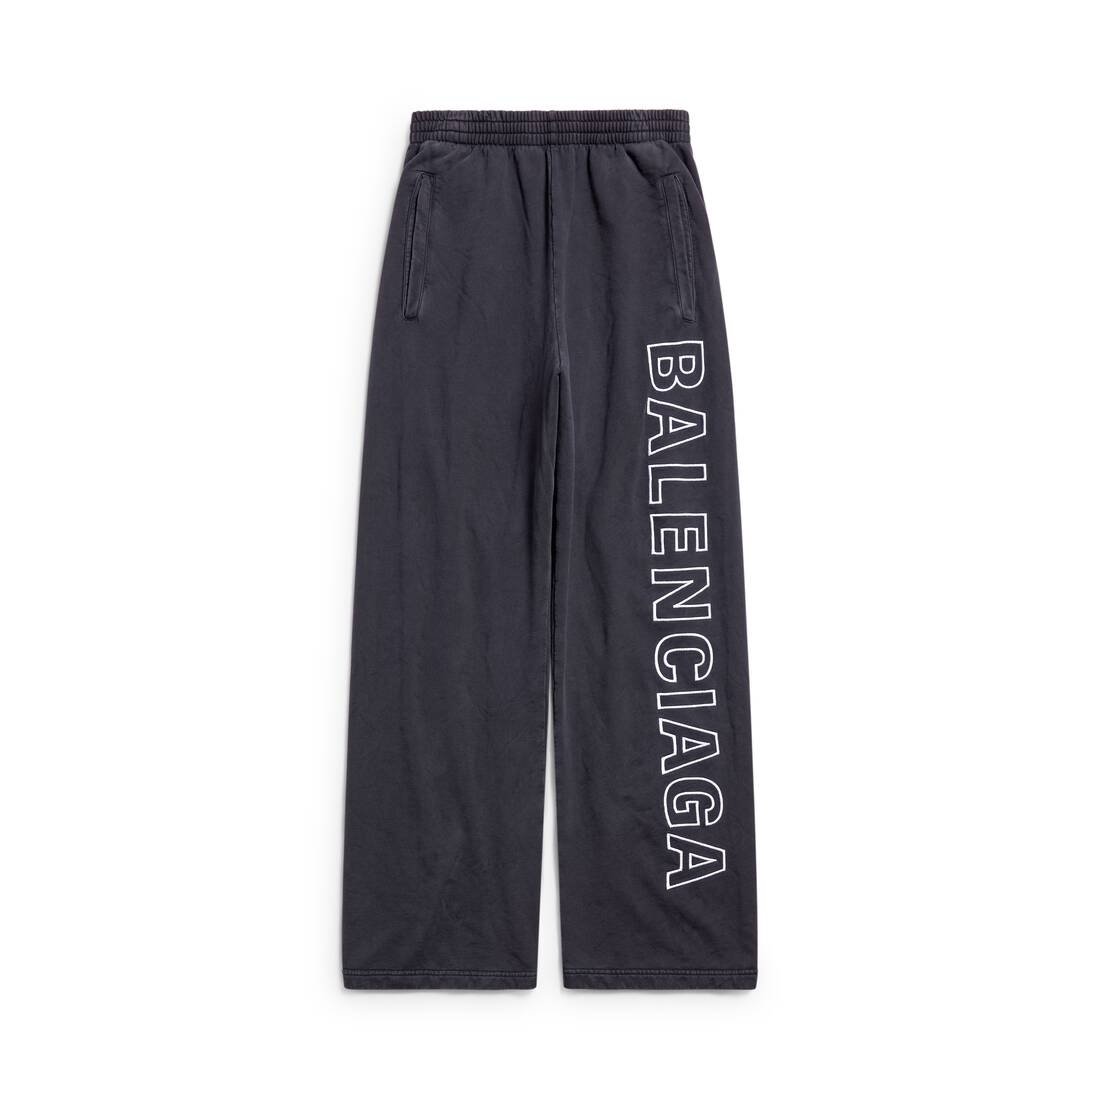 Outline Baggy Sweatpants in Black Faded - 1